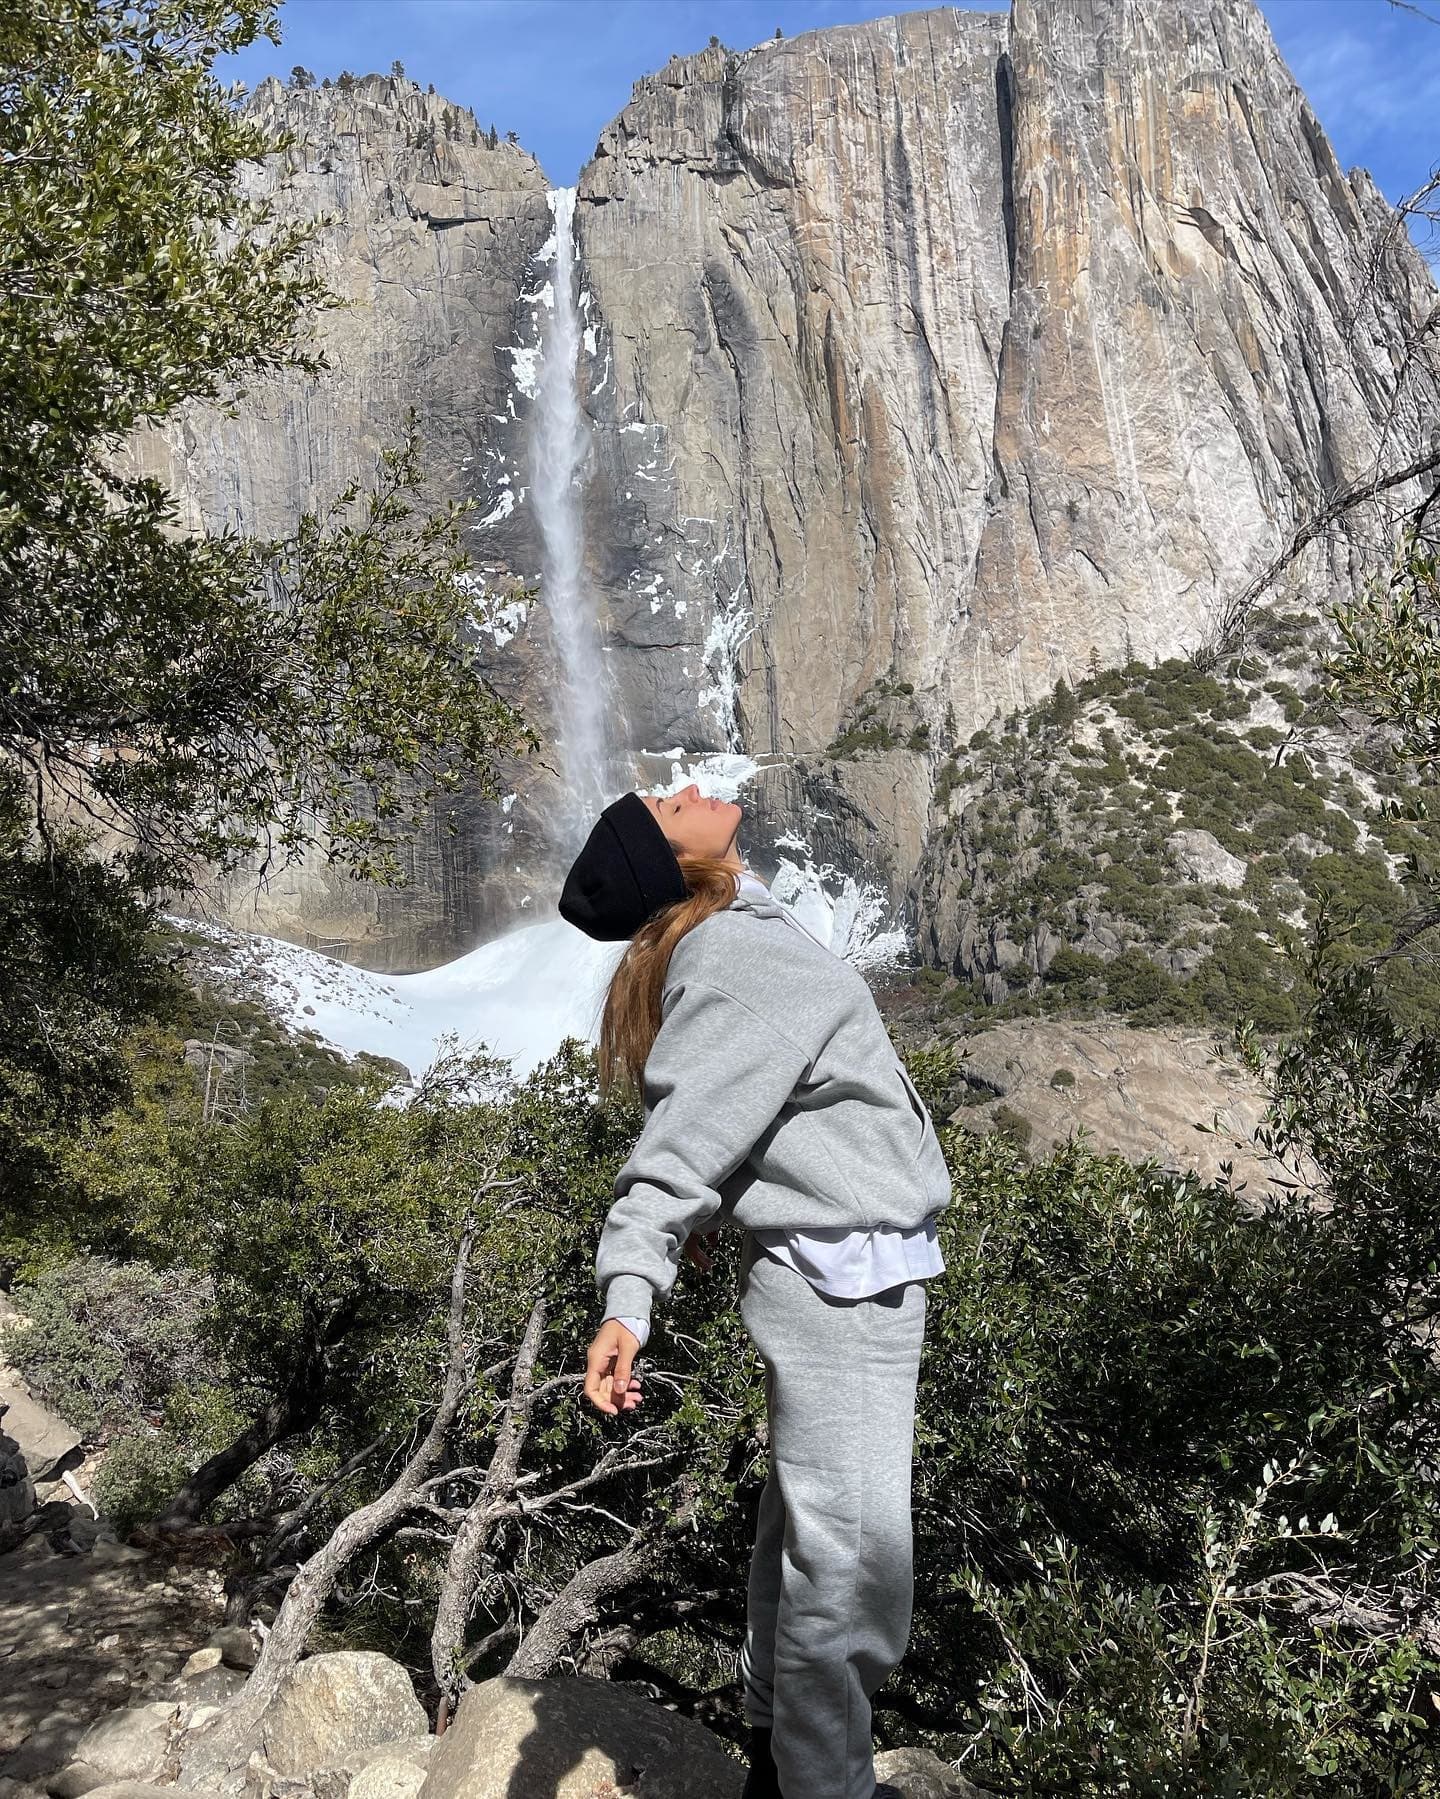 @inanna wearing a light grey sweat set while posing in front of large waterfall in the forest.  